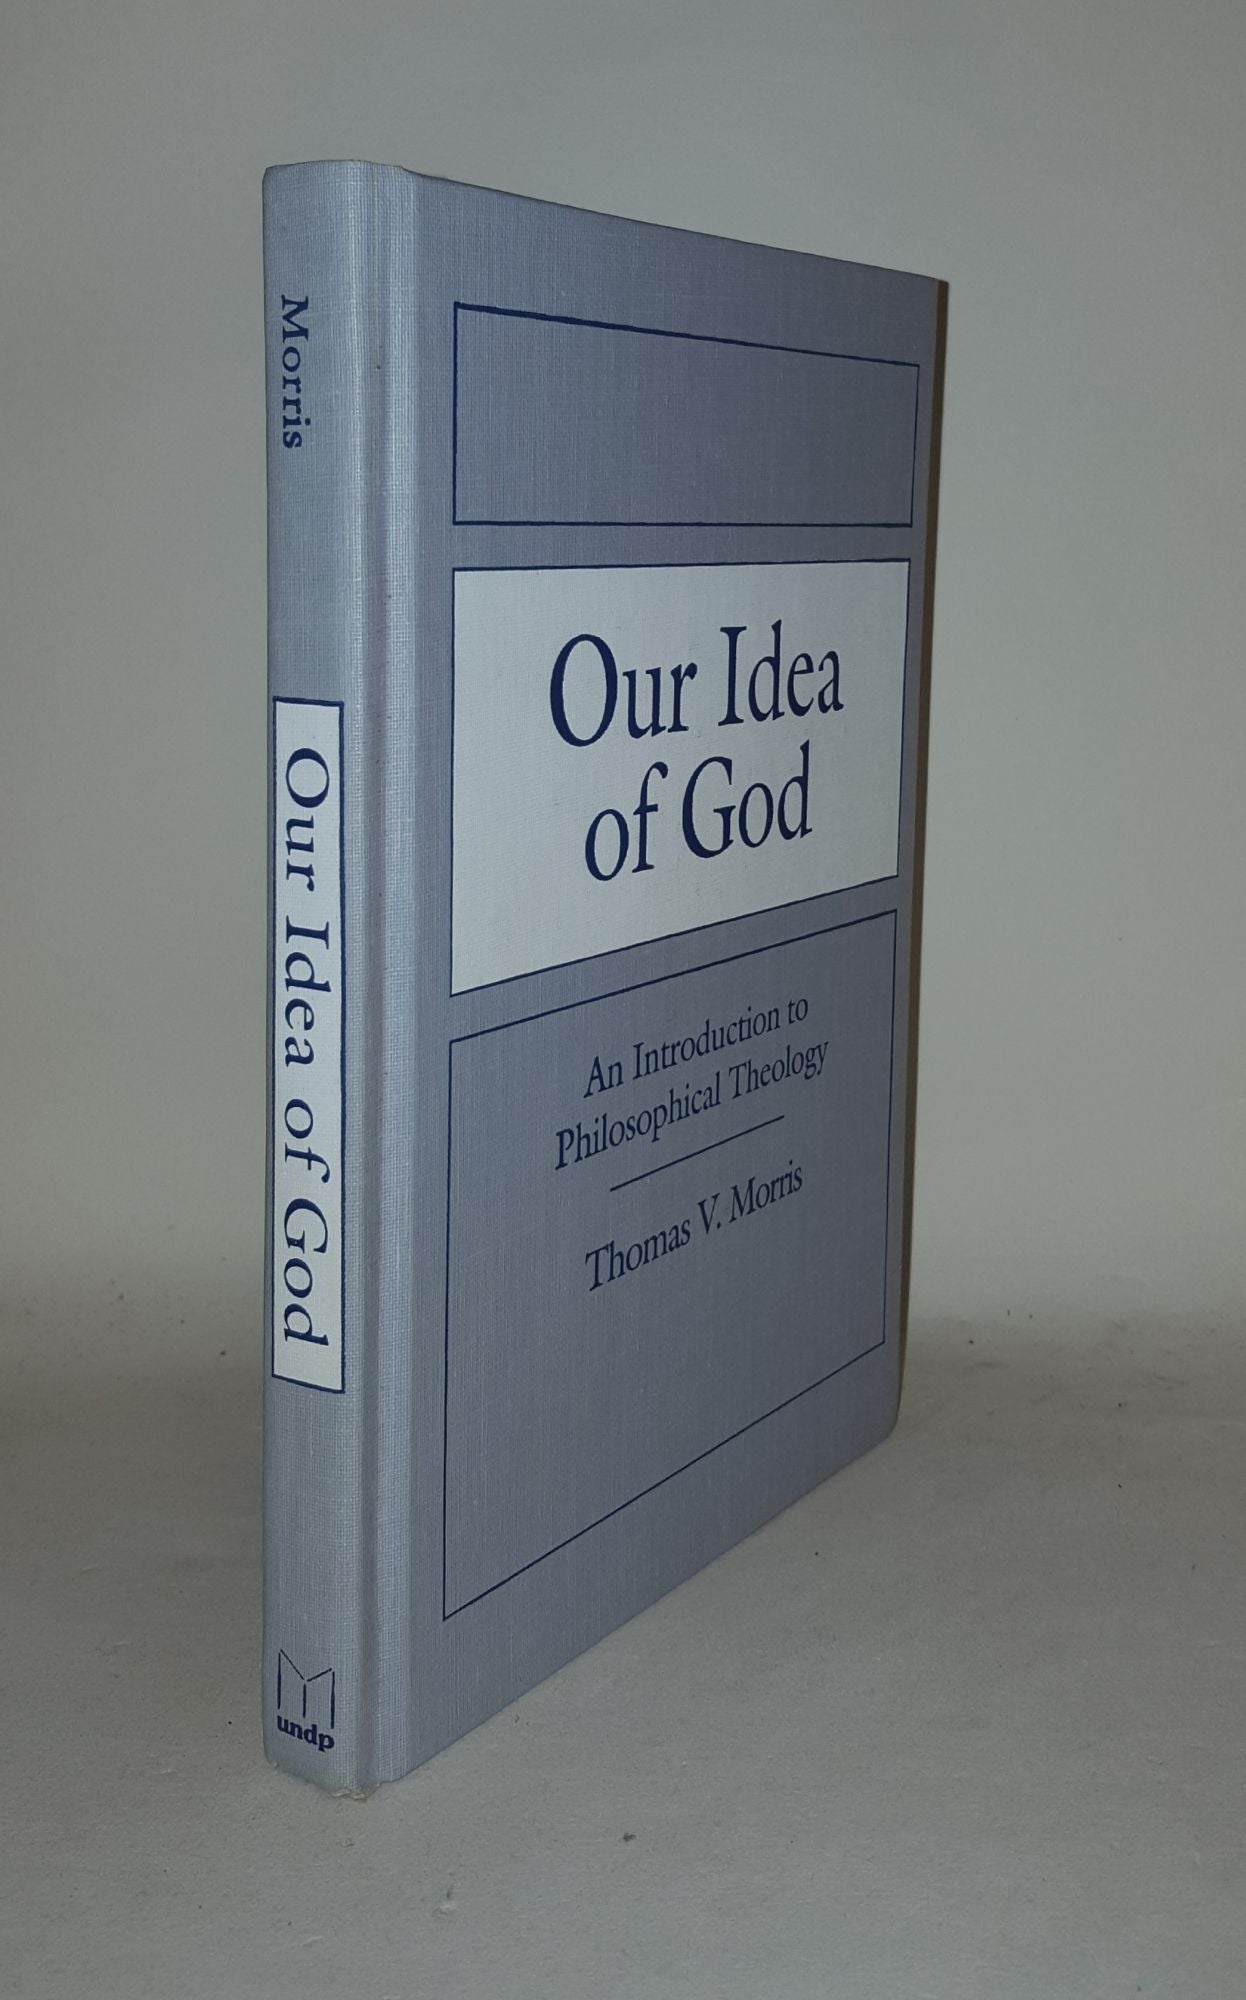 MORRIS Thomas V. - Our Idea of God an Introduction to Philosophical Theology Contours of Christian Philosophy